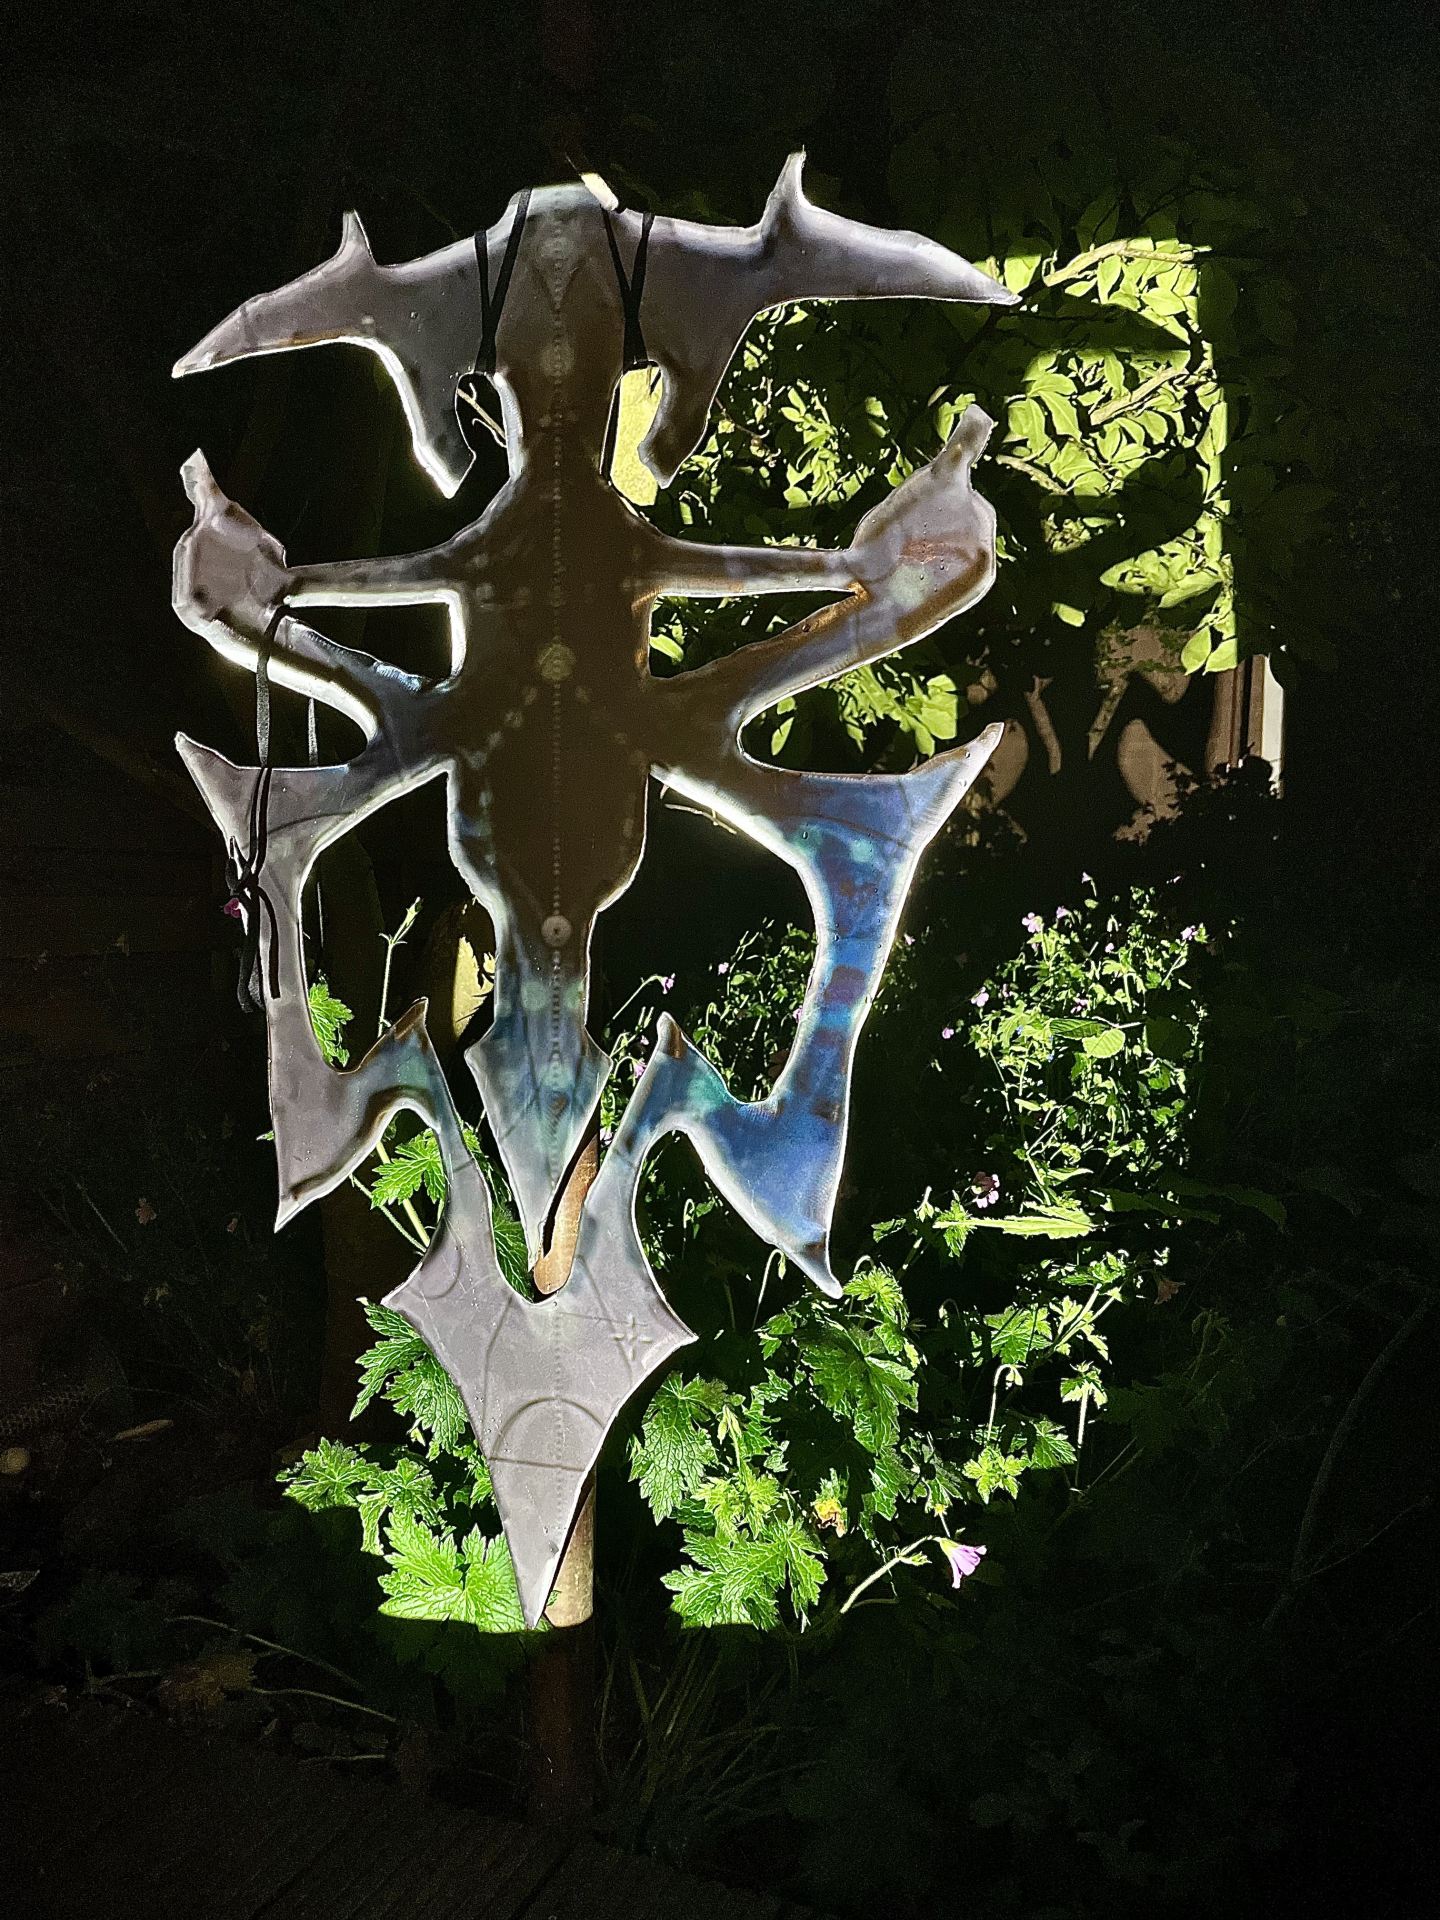 A digitally edited image of a metal sculpture hanging against some plants, set against a black background.